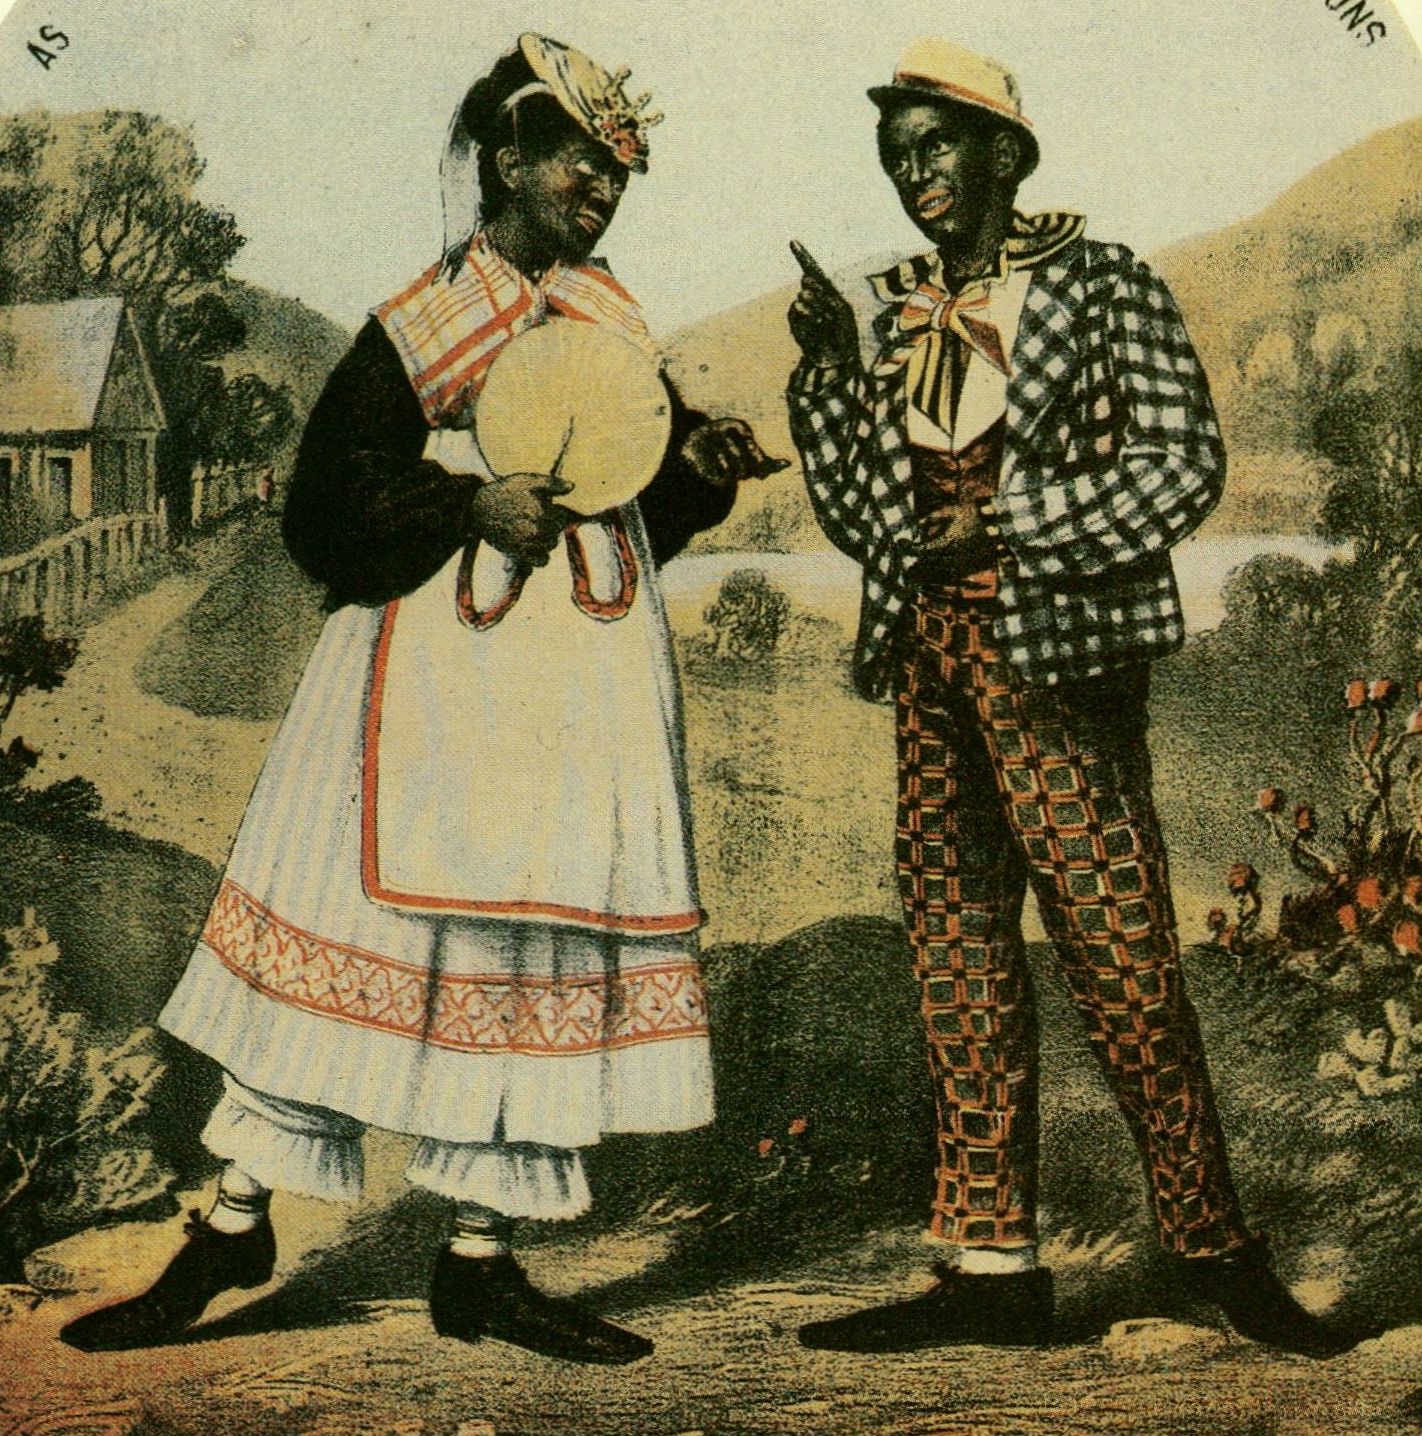 The courting couple was another minstrel staple, with the girl typically played by a man. Such lovers were usually lampooned less savagely than the dandy, since their carefree plantation world represented little threat to city audiences.